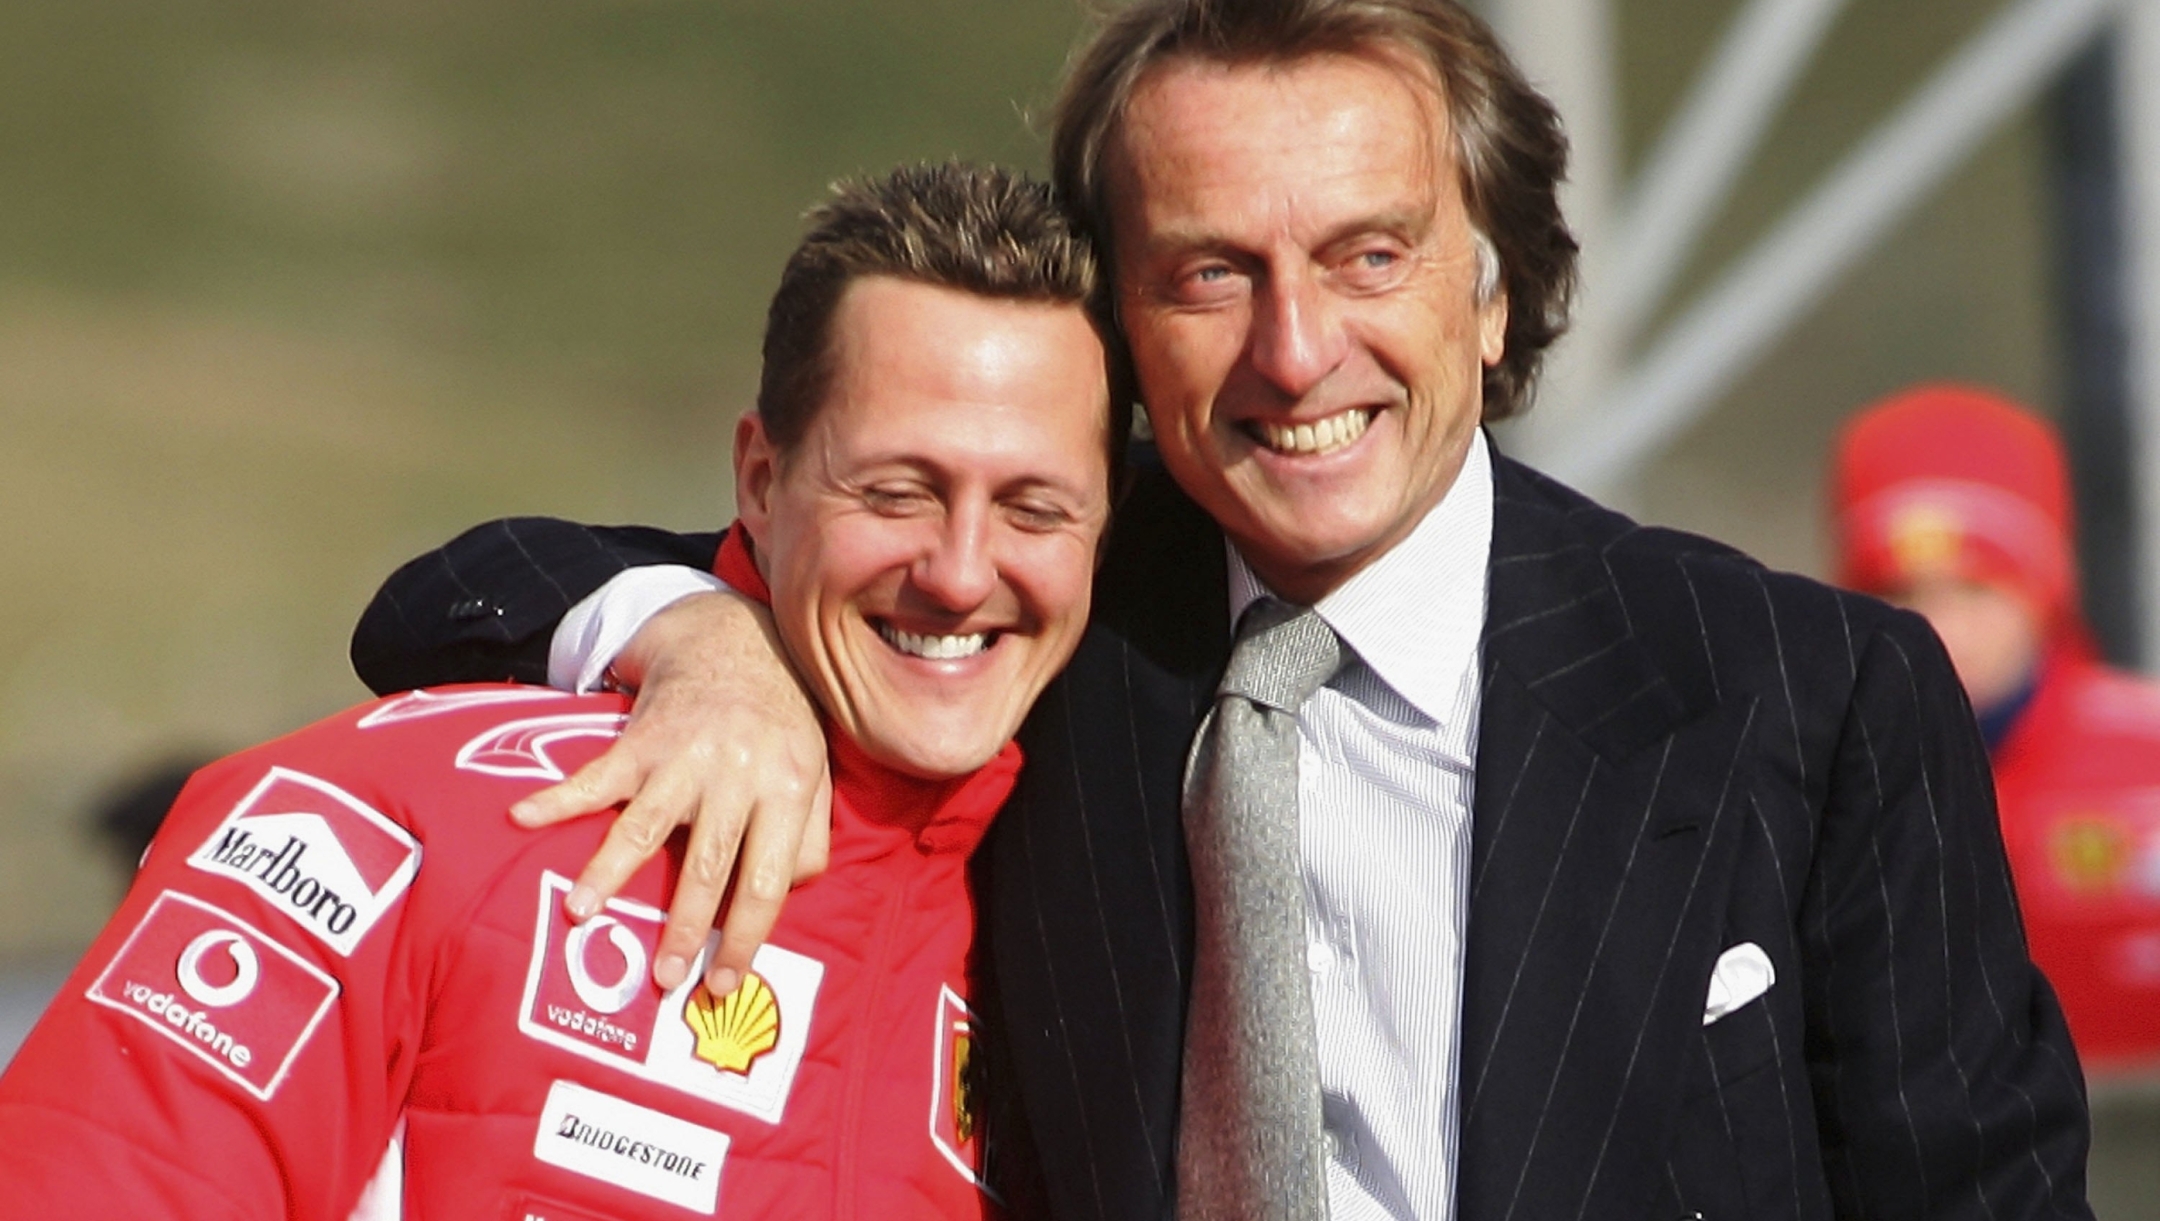 MUGELLO, ITALY - JANUARY 24:  President Luca di Montezemolo of Ferrari hugs his driver Michael Schumacher of Germany during the launch of the new Ferrari F1 car for the Season 2006 on January 24, 2006 in Mugello near Florence, Italy.  (Photo by Vladimir Rys/Bongarts/Getty Images)